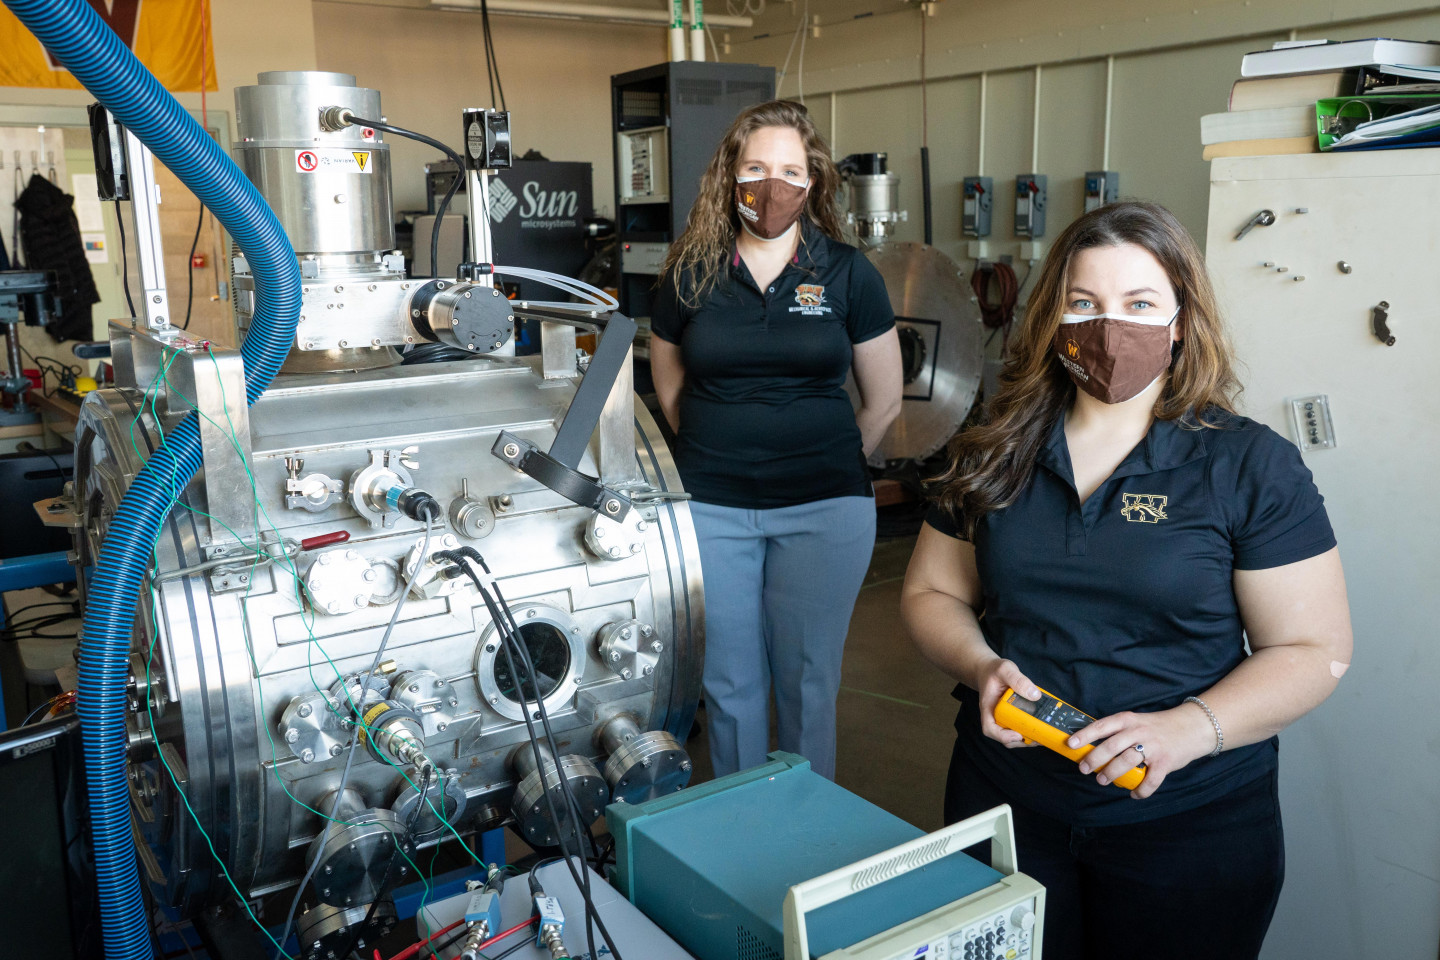 Dr. Kristina Lemmer and Margaret Mooney pose for a picture in an engineering laboratory.